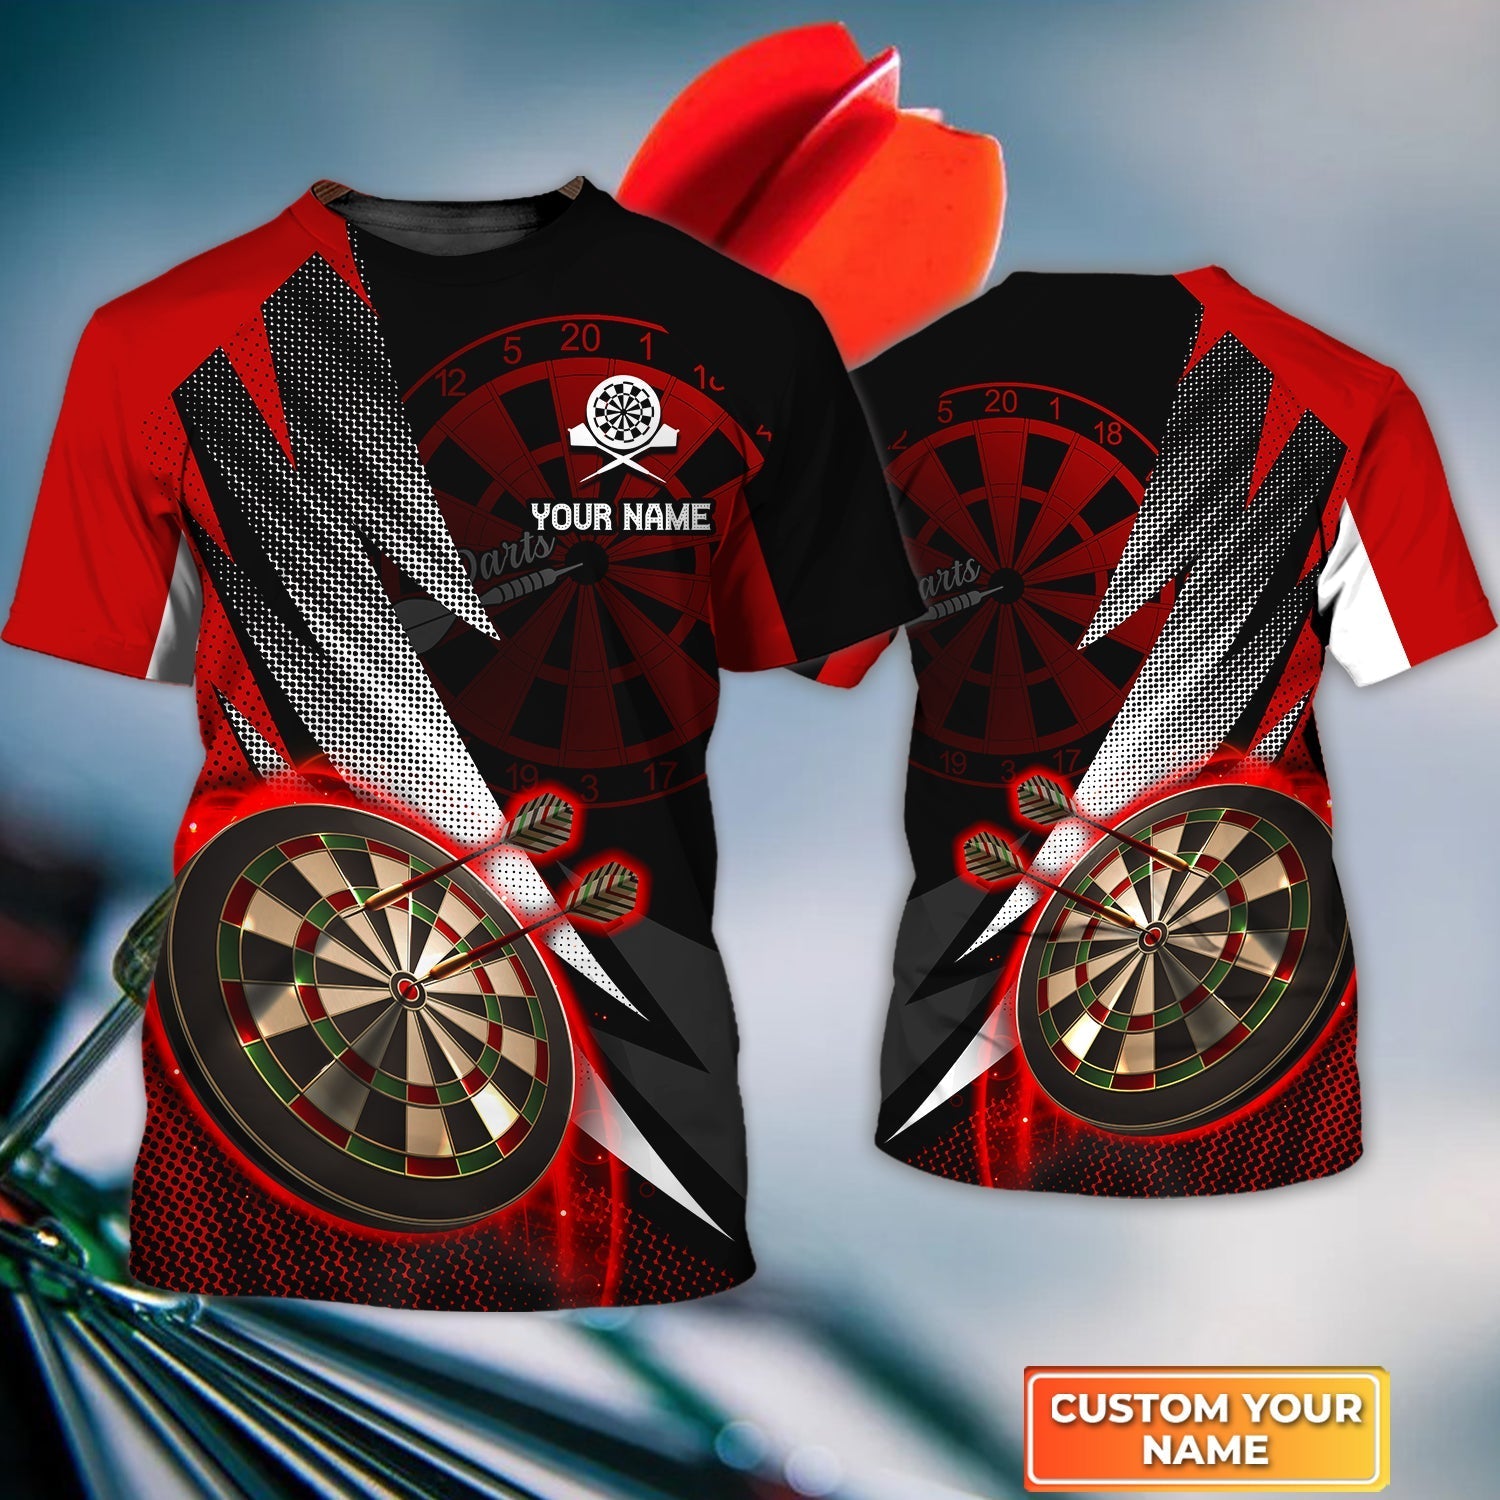 Whirly Darts shirt, Personalized Name 3D Tshirt, gift For Darts Player – DT107